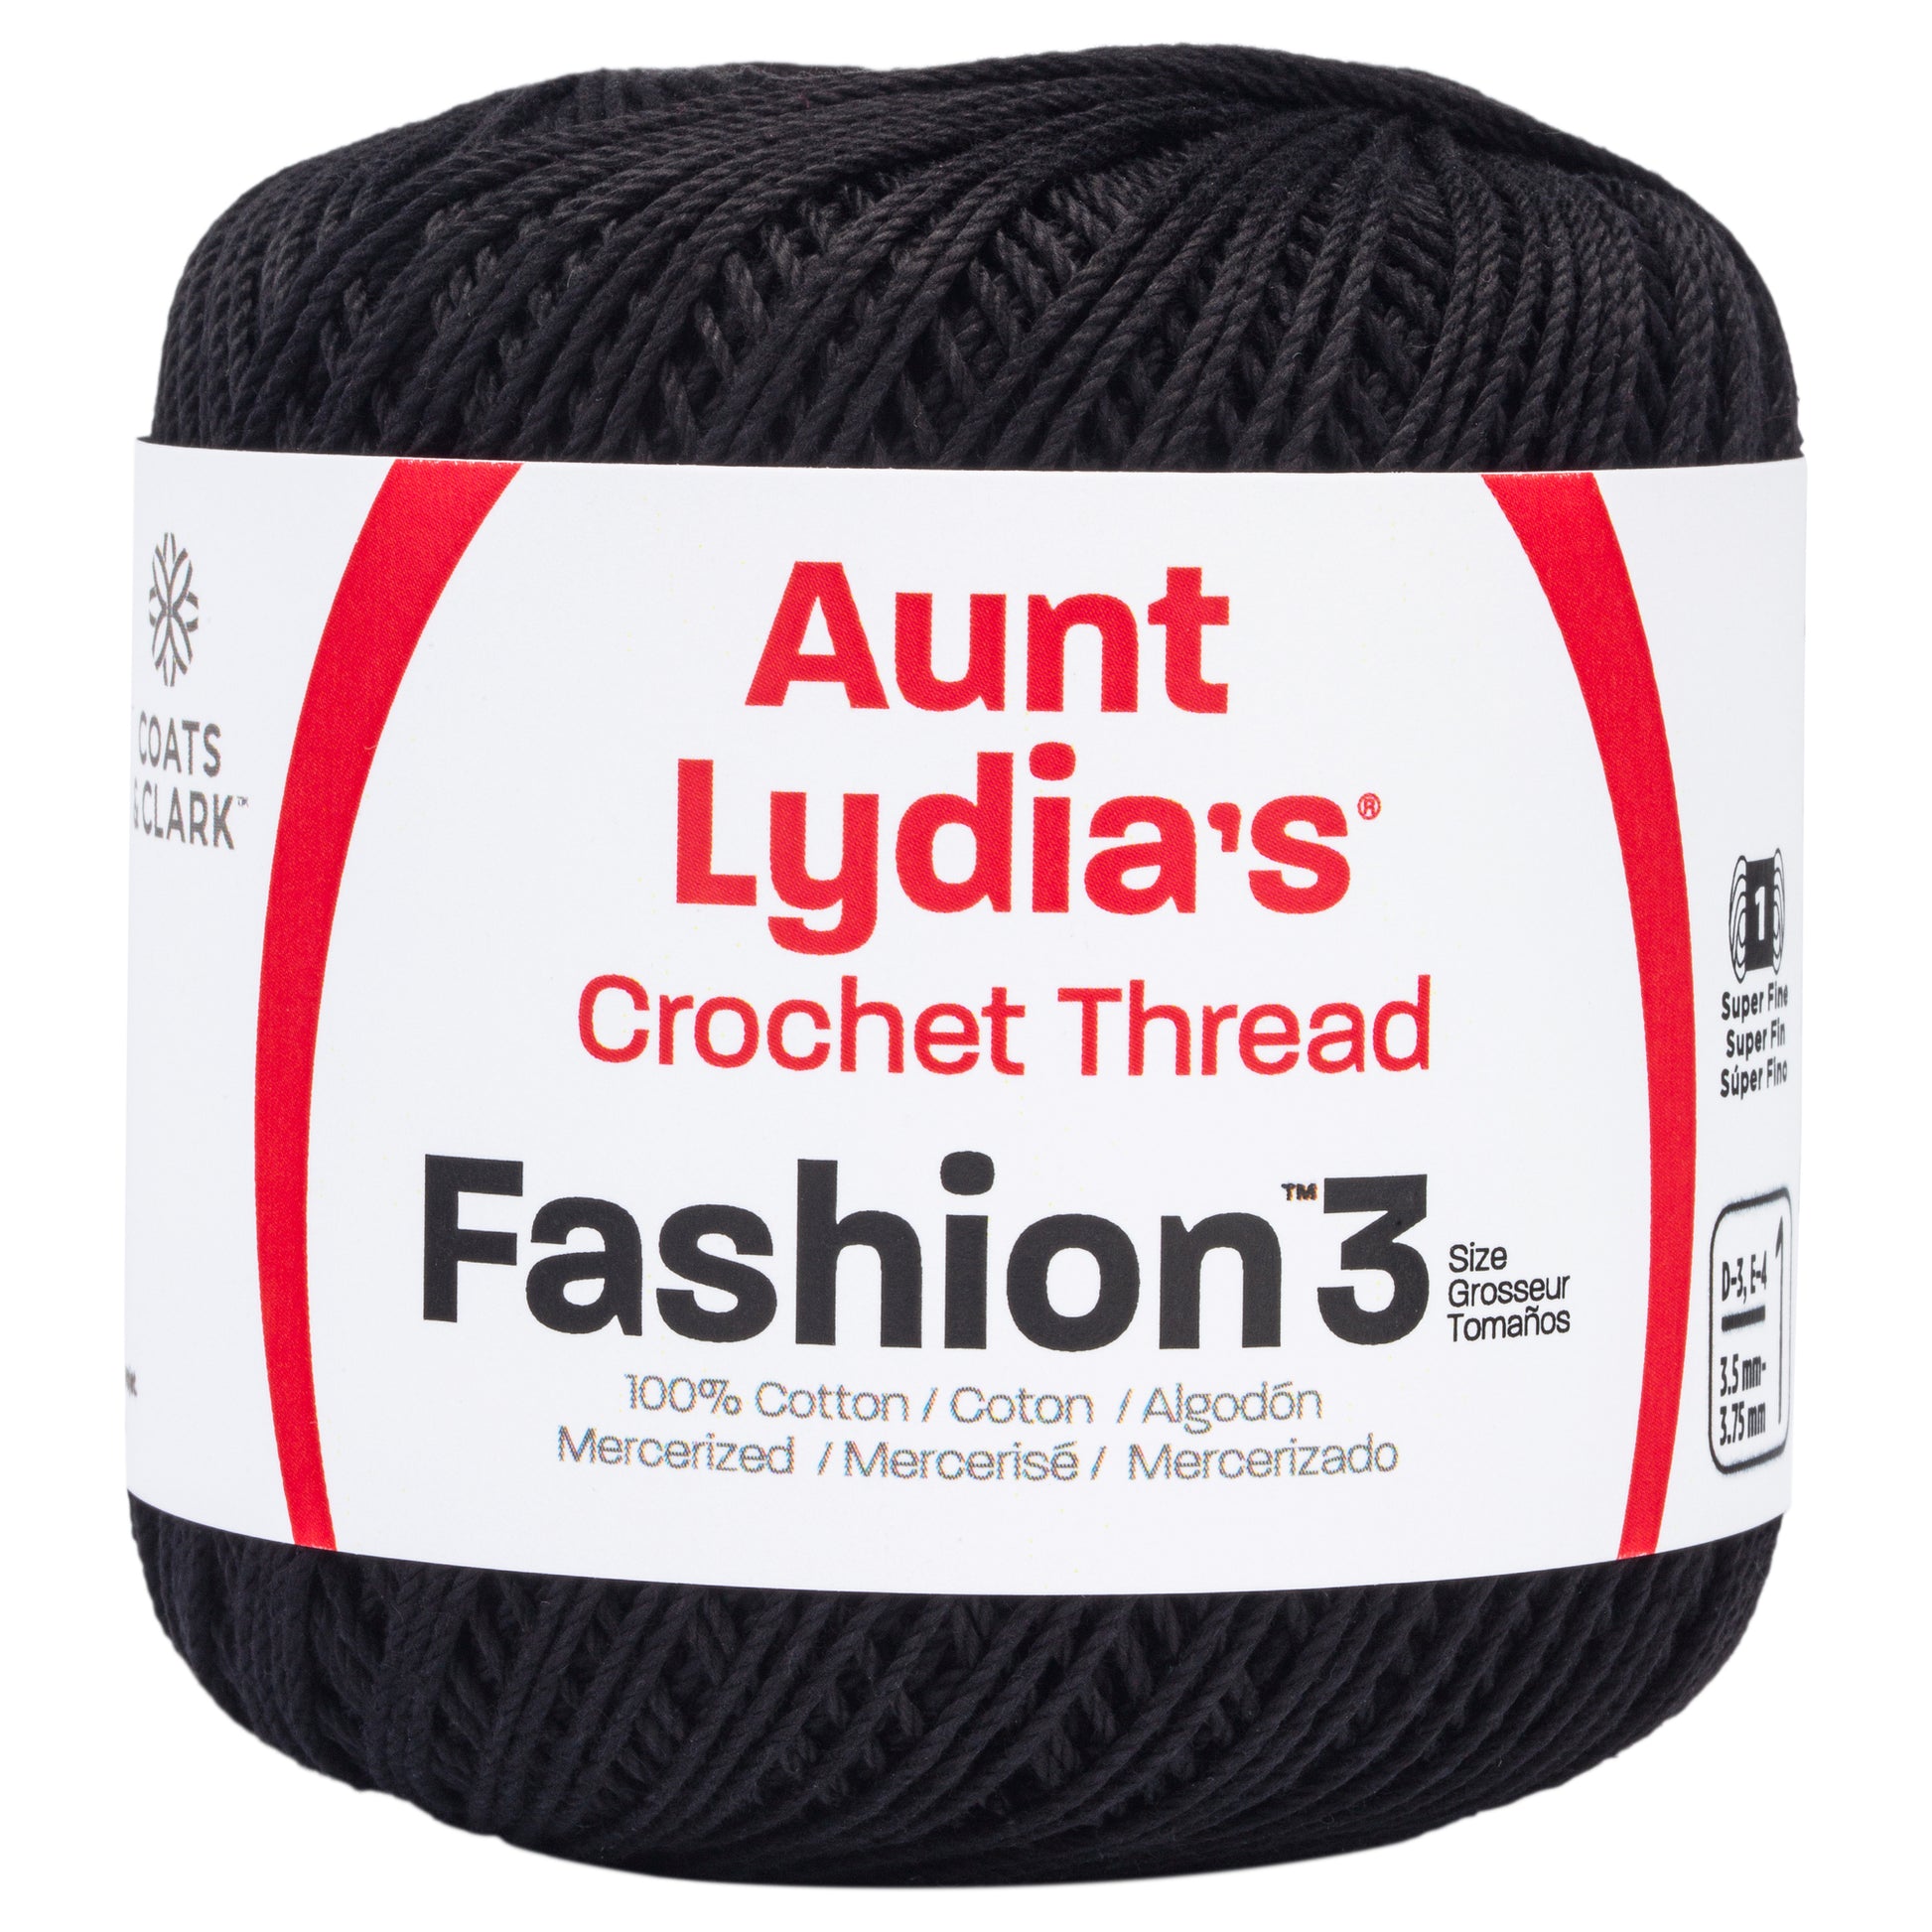 Aunt Lydia's Fashion Crochet Thread Size 3 Natural